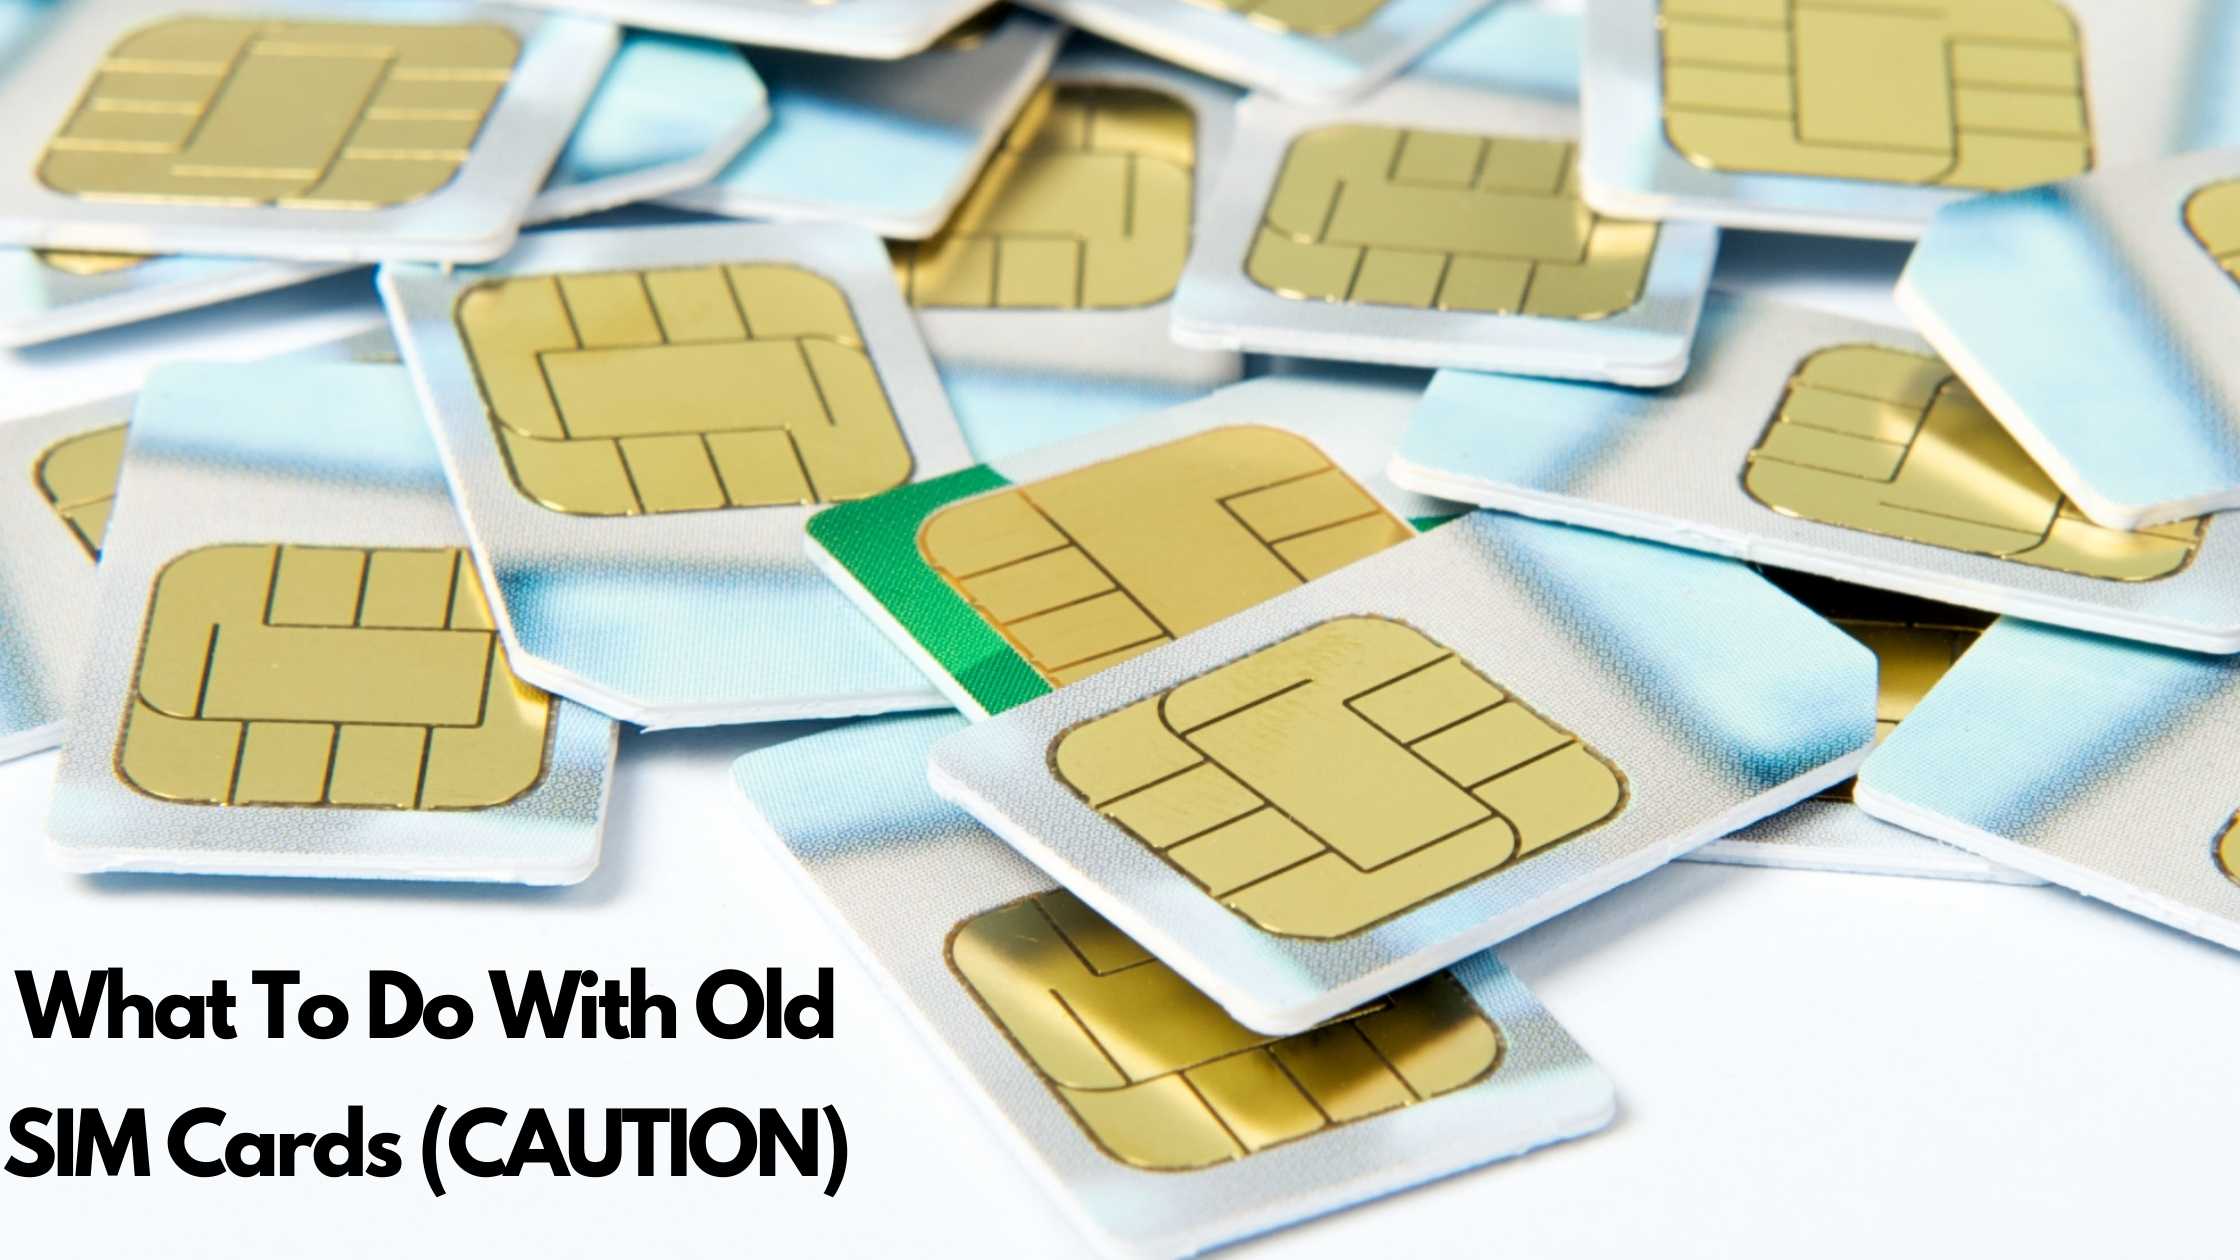 What To Do With Old SIM Cards Caution